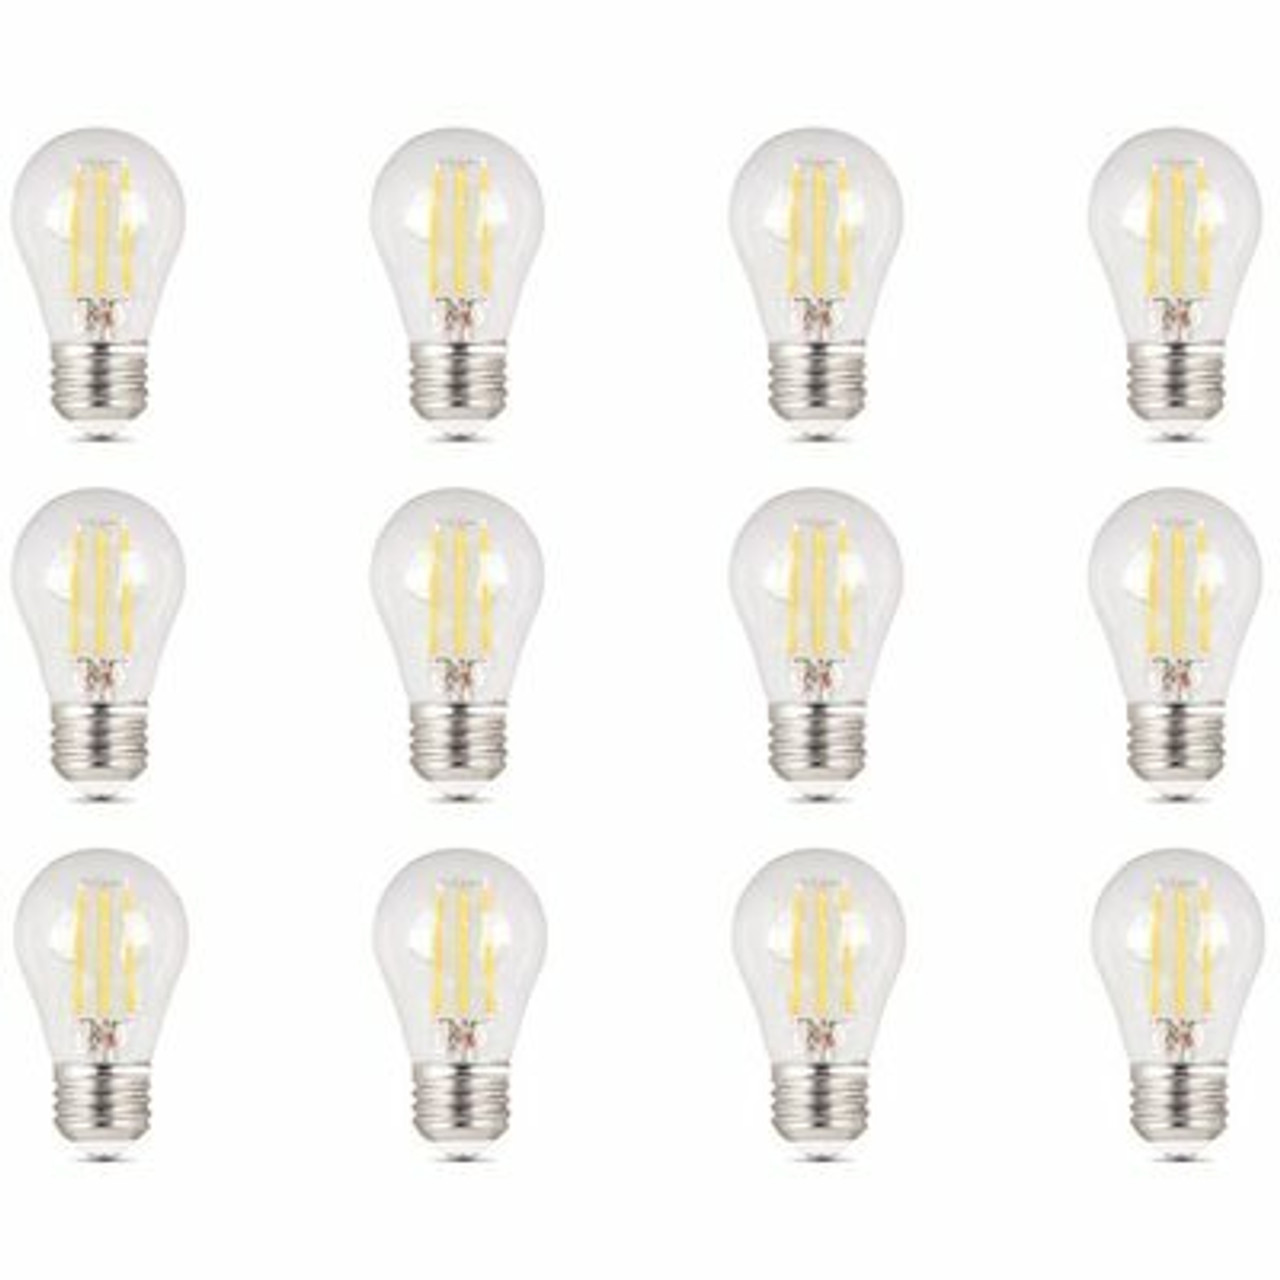 Feit Electric 40-Watt Equivalent A15 Dimmable Filament Led 90 Plus Cri Clear Glass Light Bulb Soft White (12-Pack)